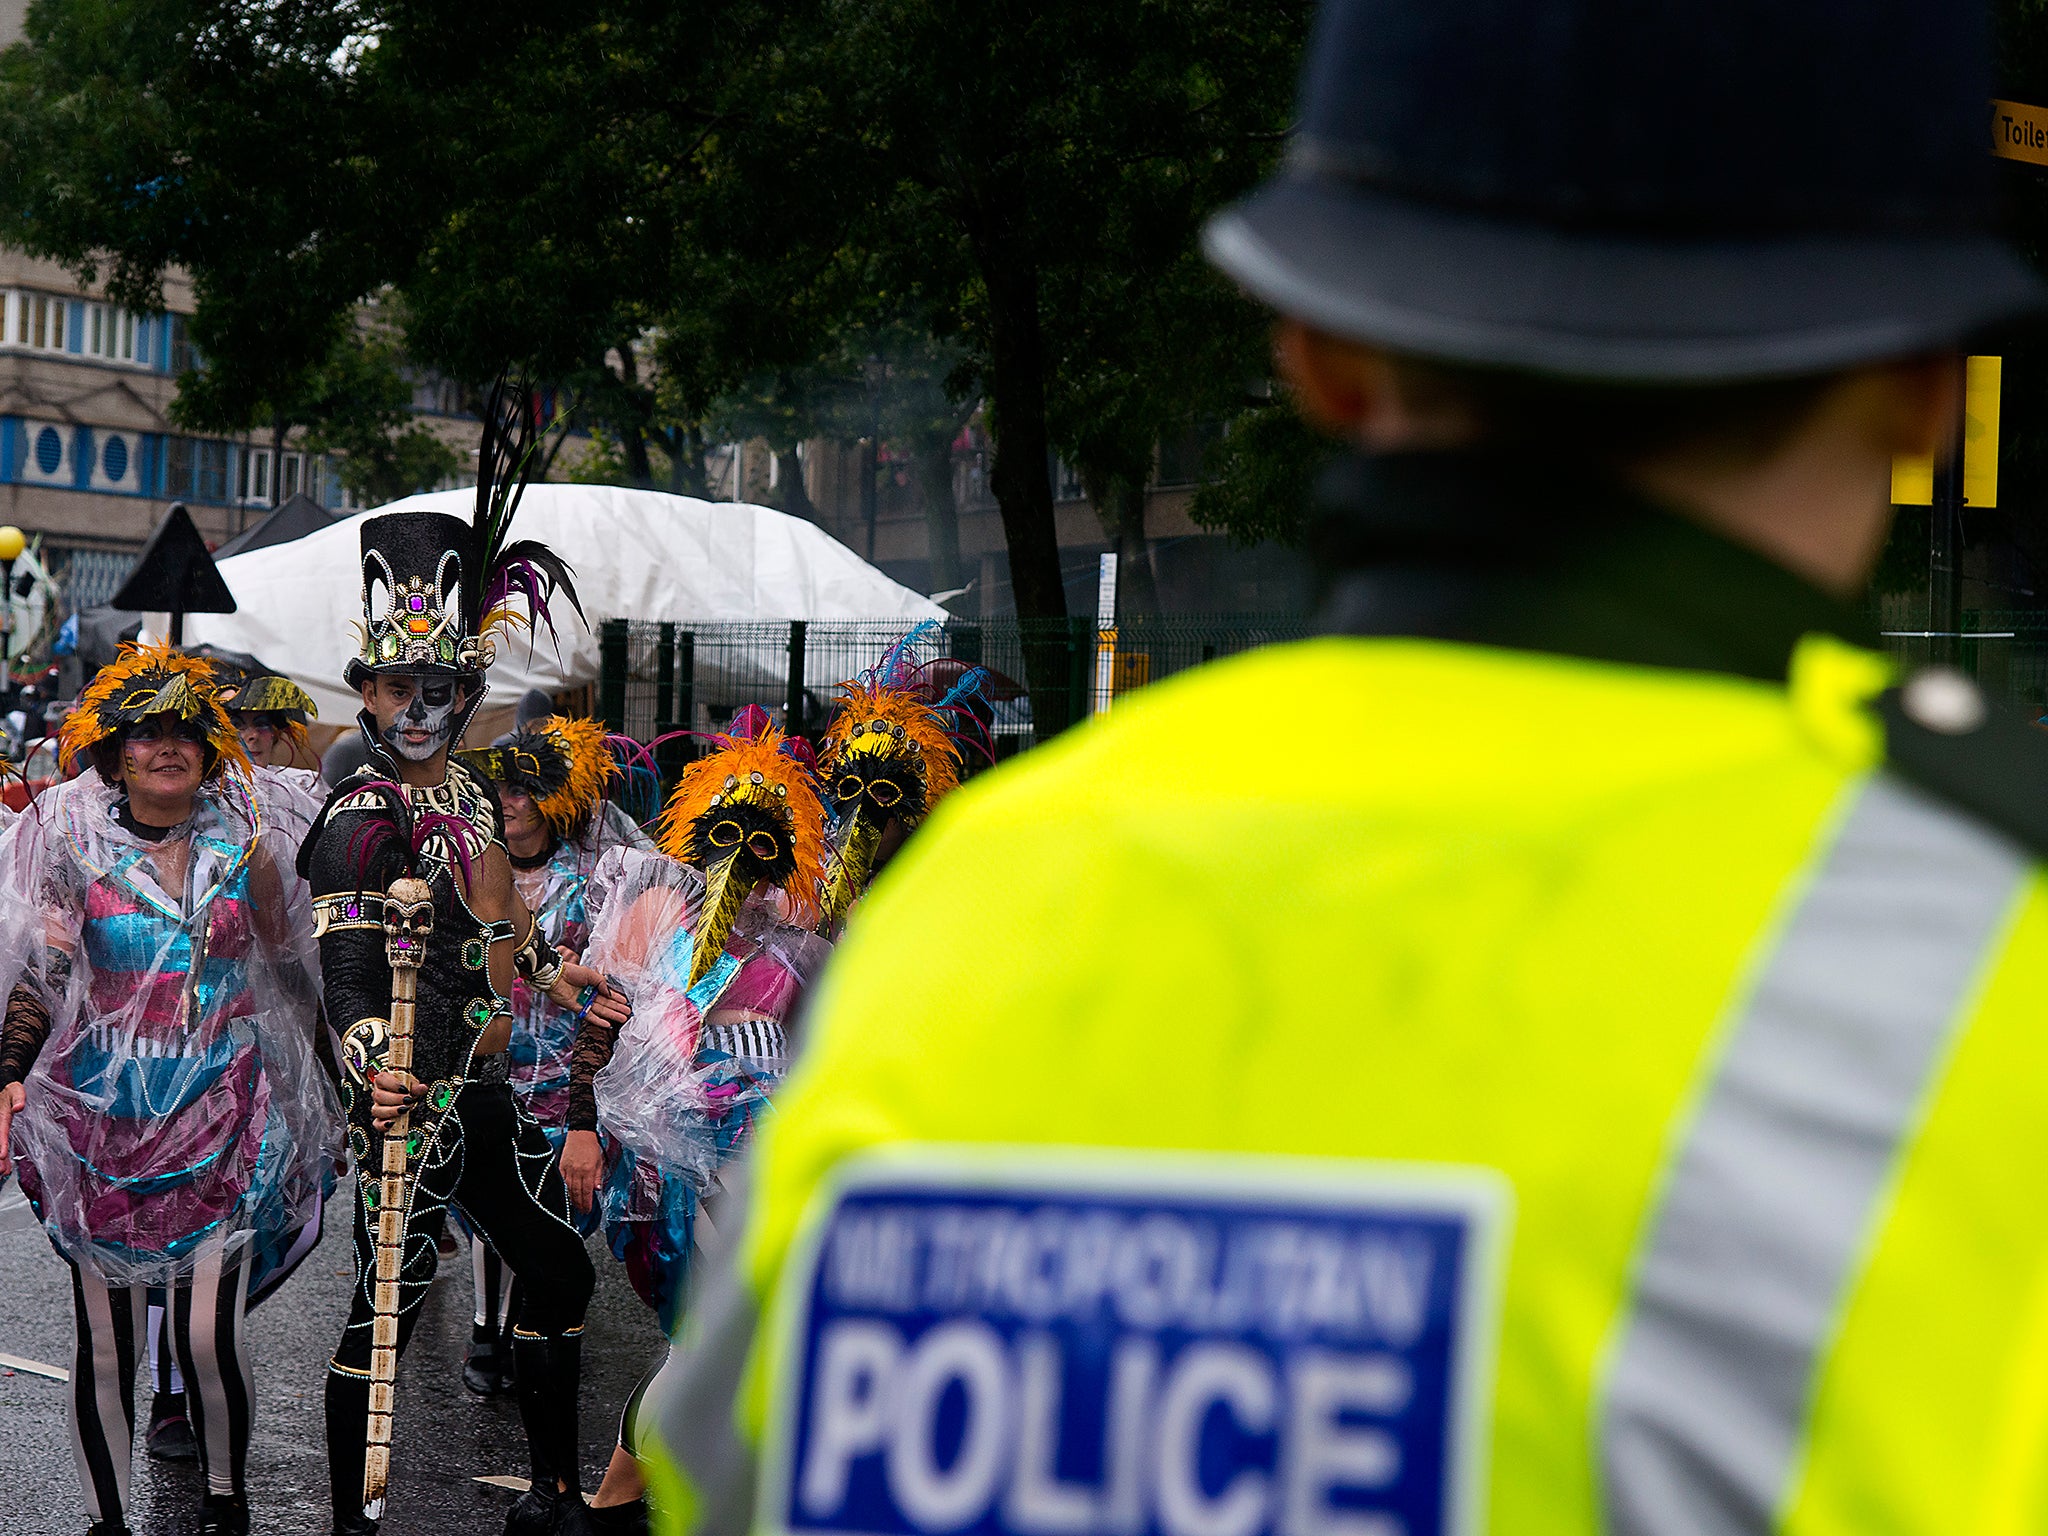 A police officer presides over festivities at this year's carnival